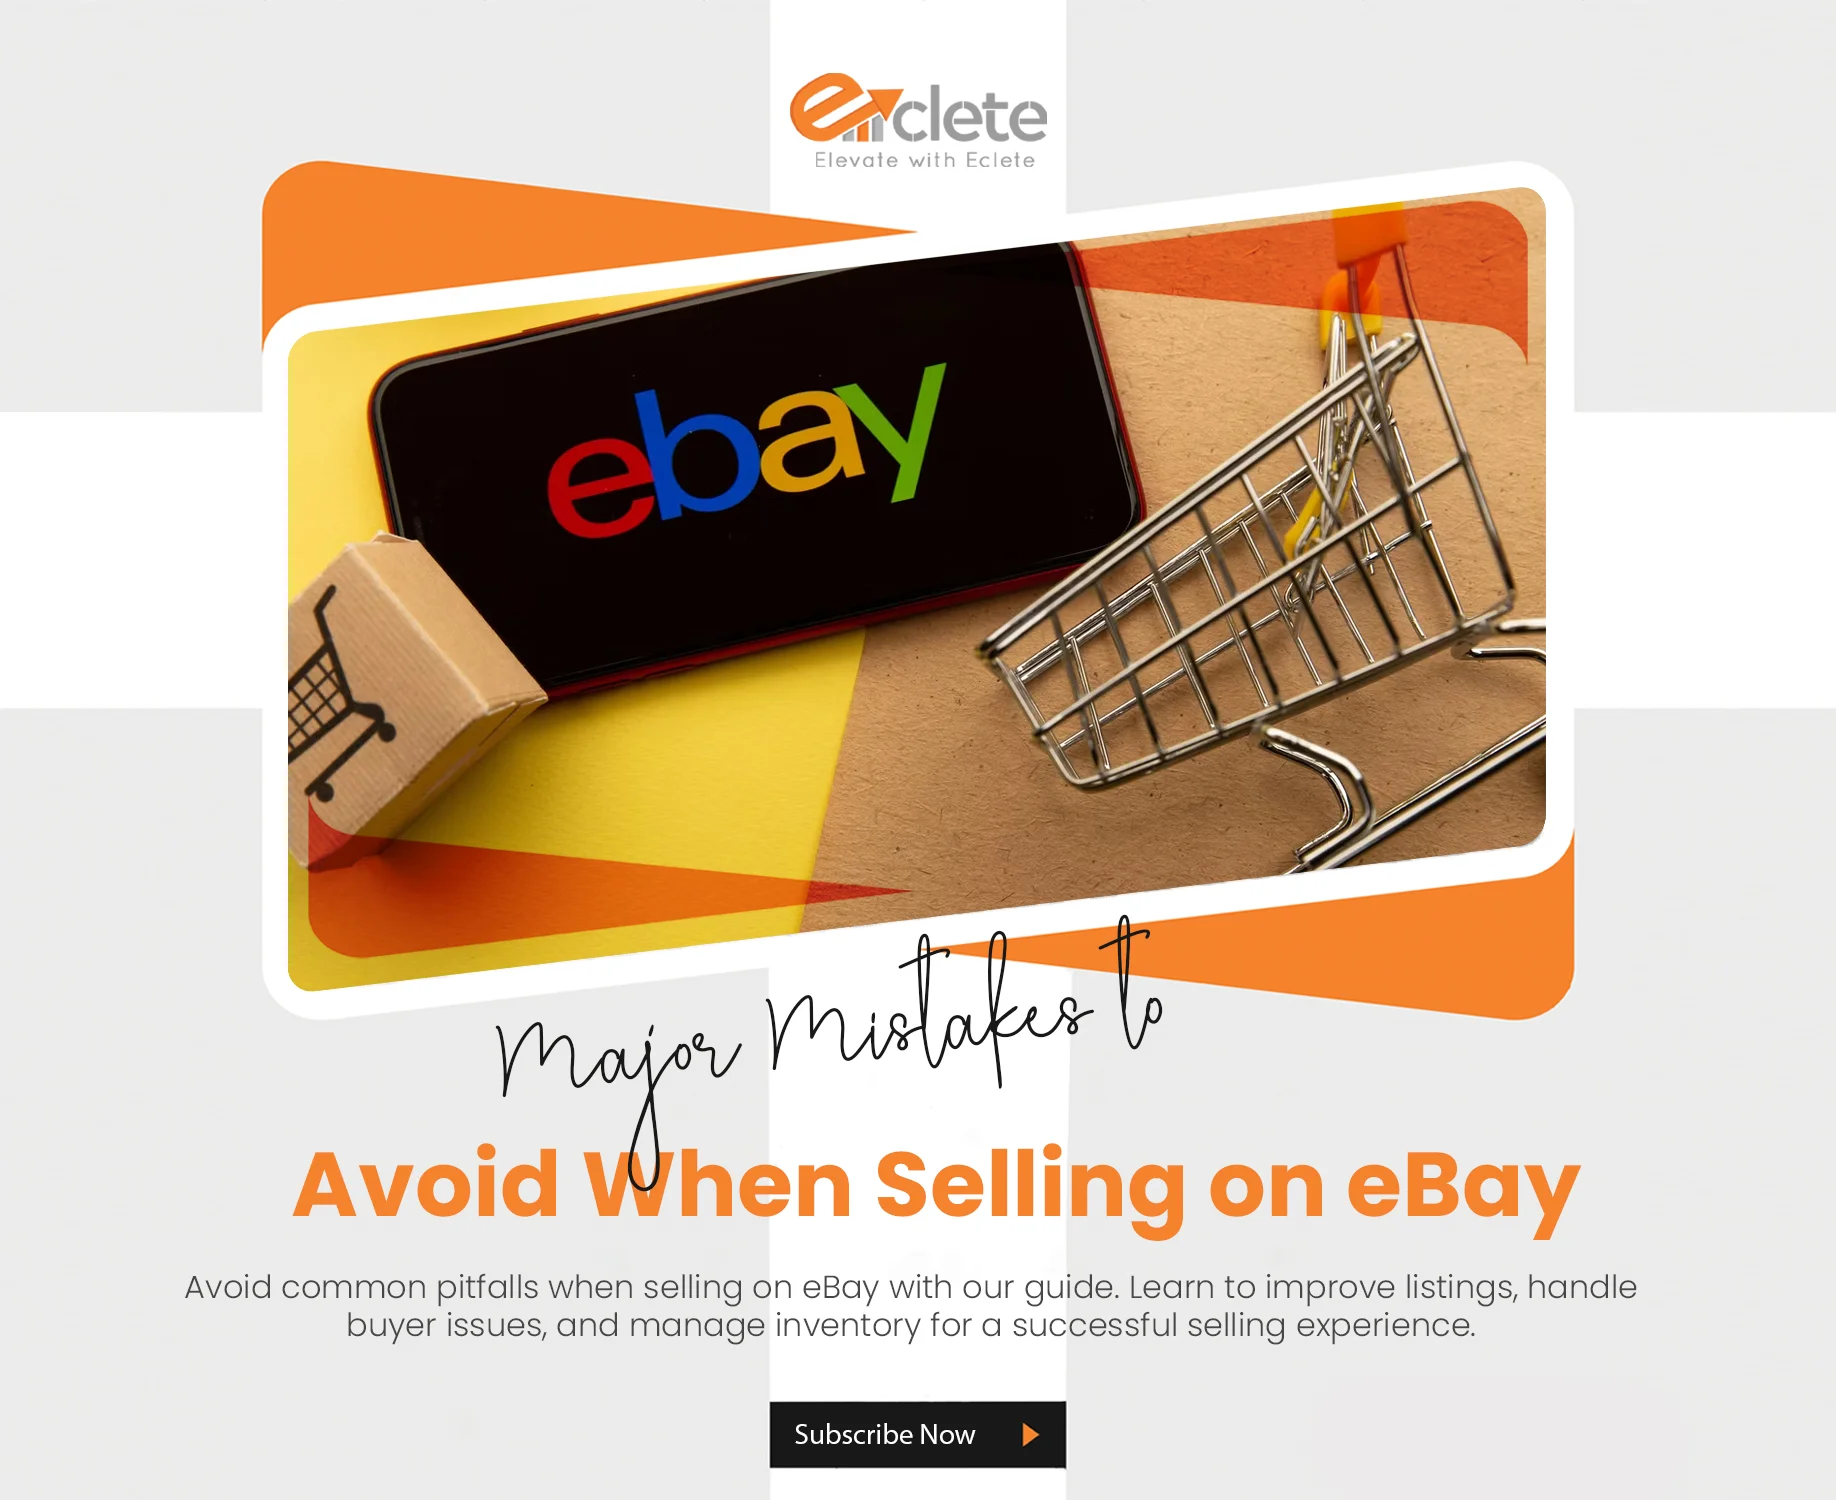 Major Mistakes to Avoid When Selling on eBay